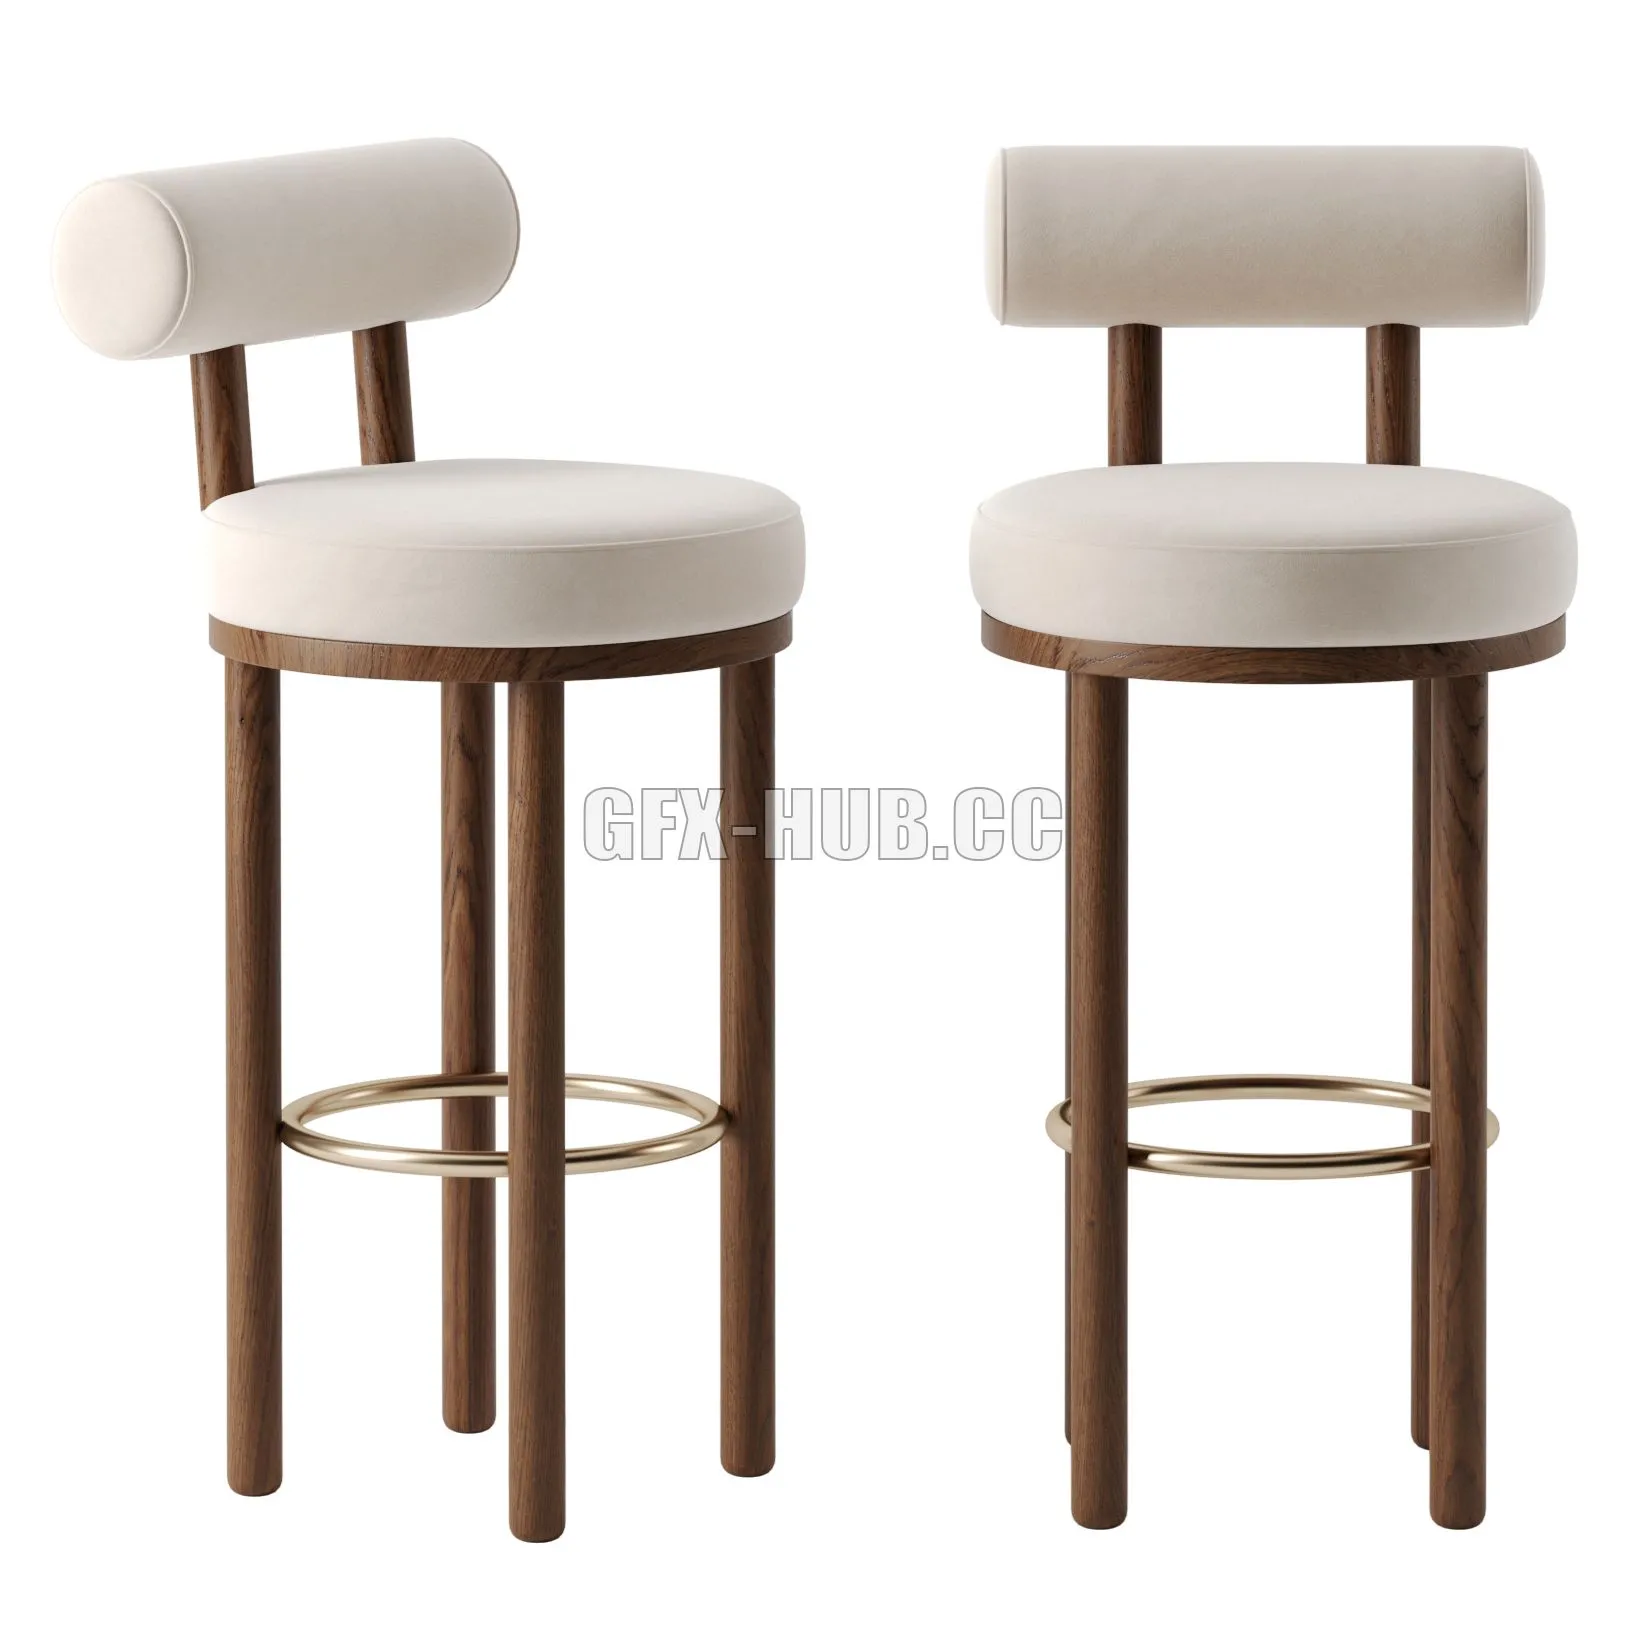 FURNITURE 3D MODELS – Moca Bar Chair by Collector